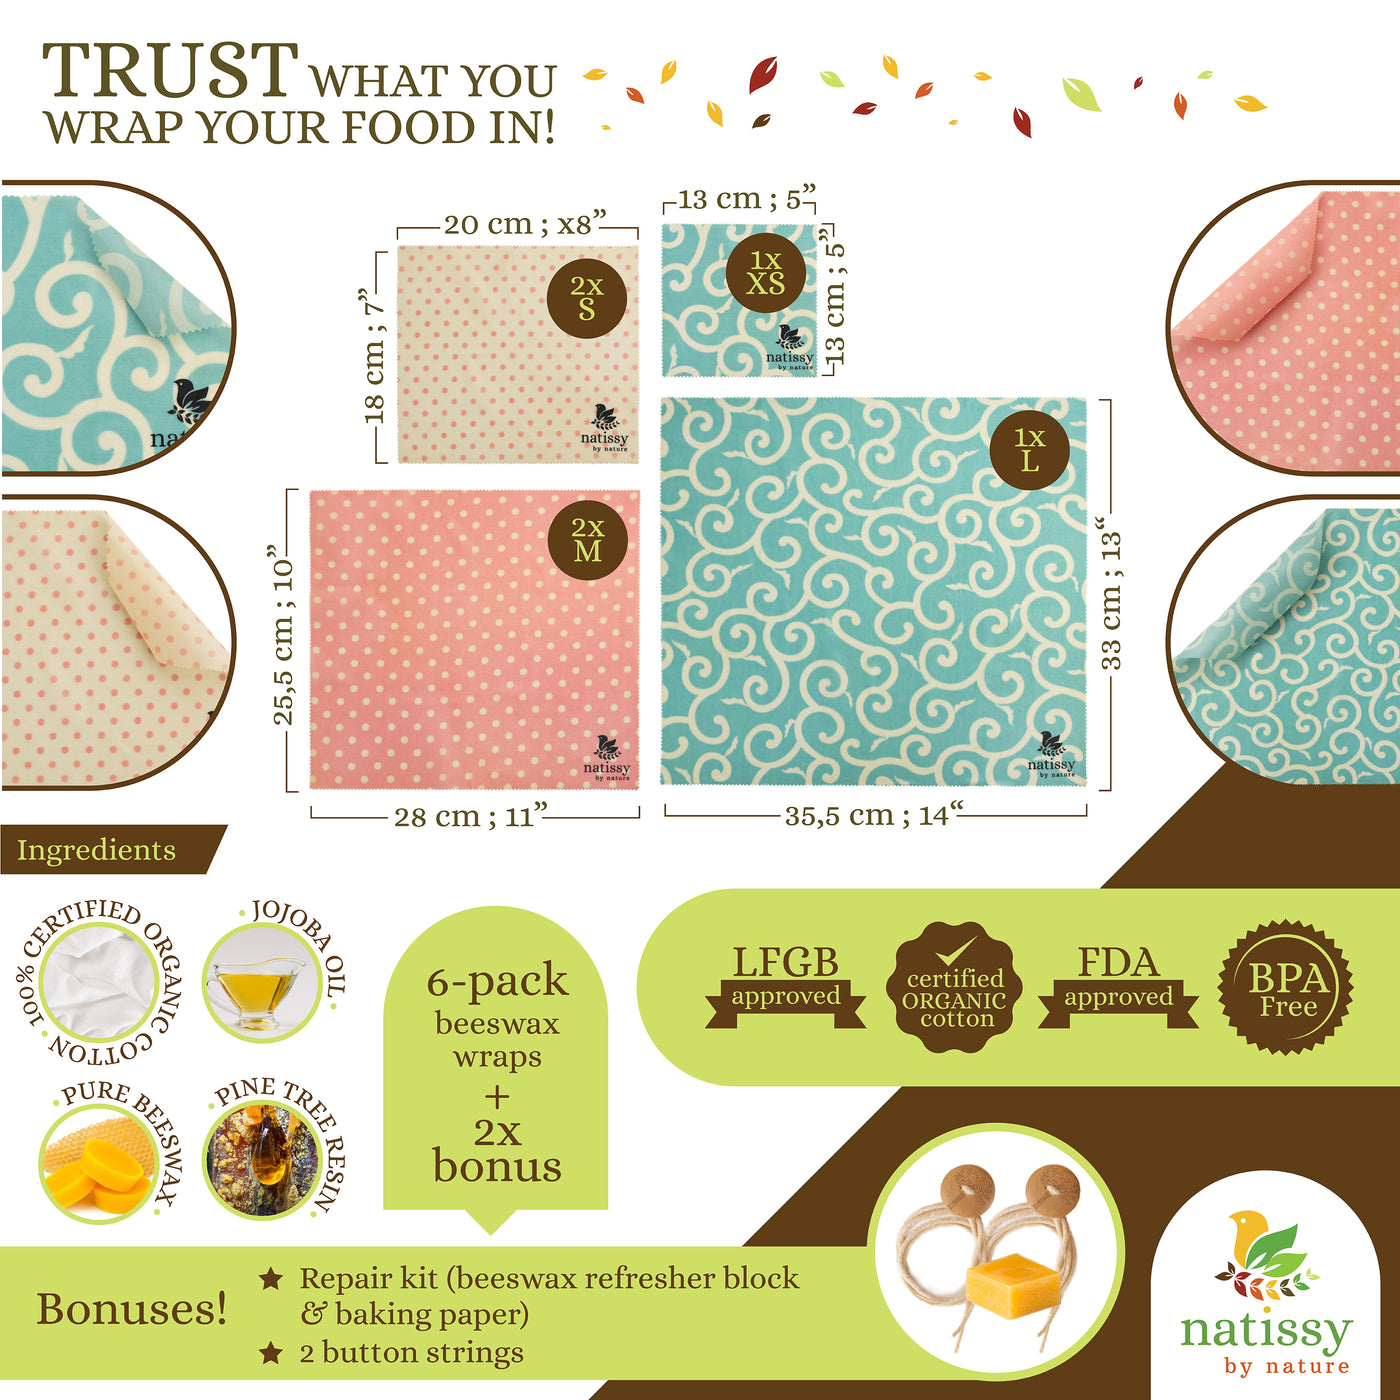 Beeswax Wraps, Set of 6 Reusable Organic Waxed Food Storage Cloths, Sustainable Plastic Free Bowl Cover & Eco-Friendly Wax Sandwich Wrapper, Zero Waste Cling Film Alternative for Cheese, Fruits, Bread